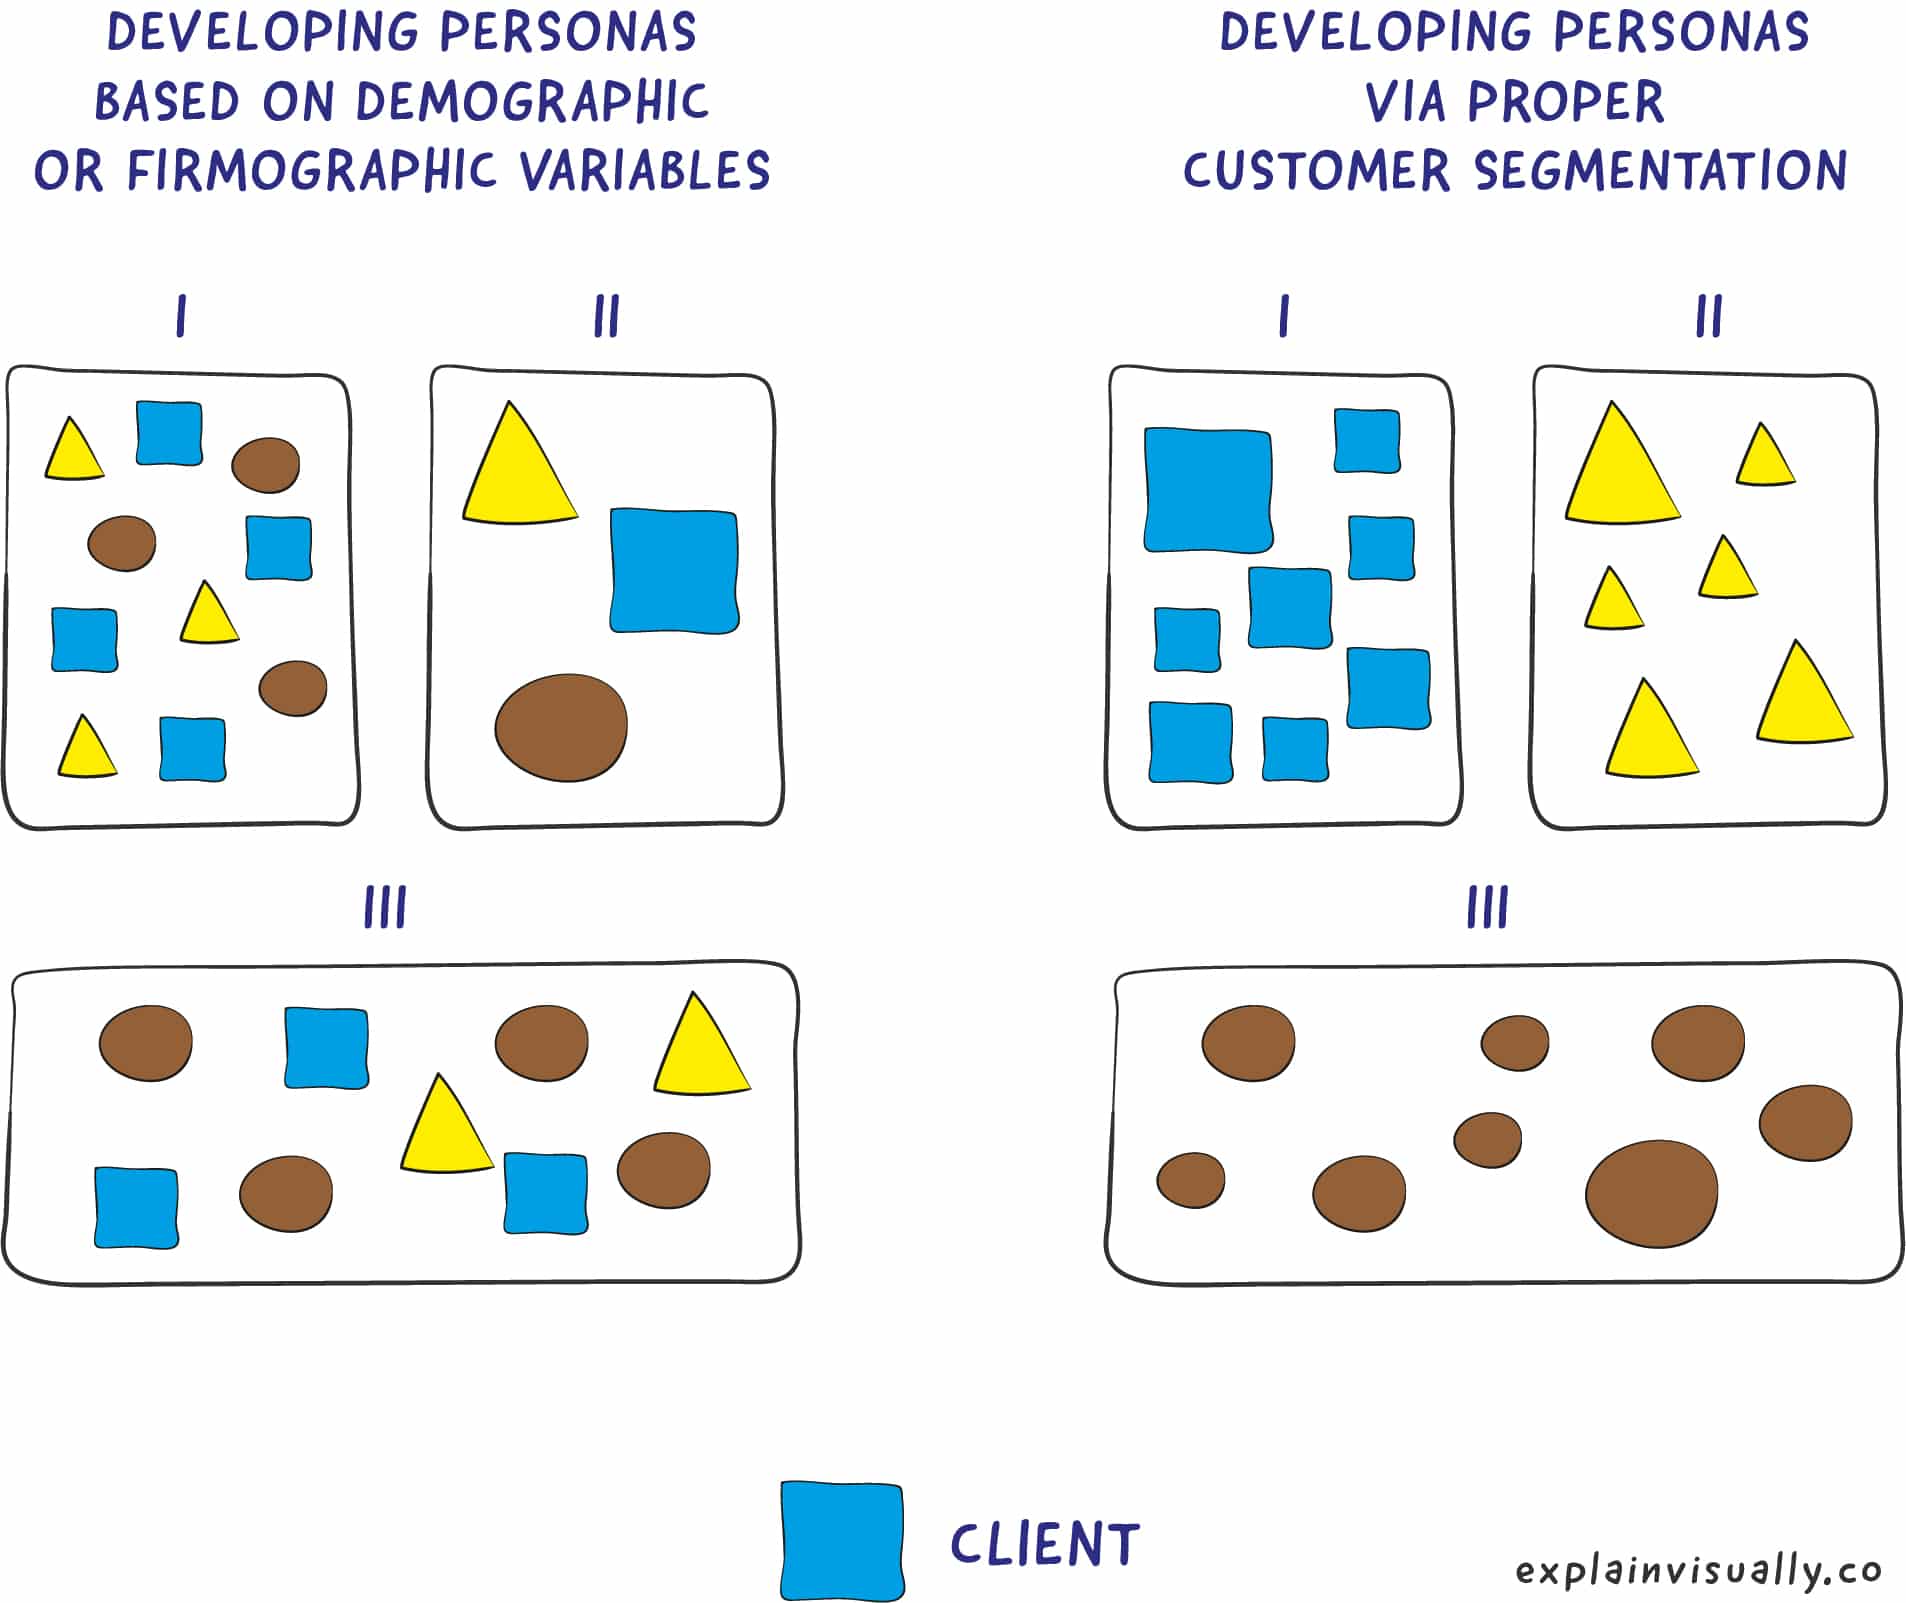 different shapes shown as methaphors for bad personas and good customer segmentation